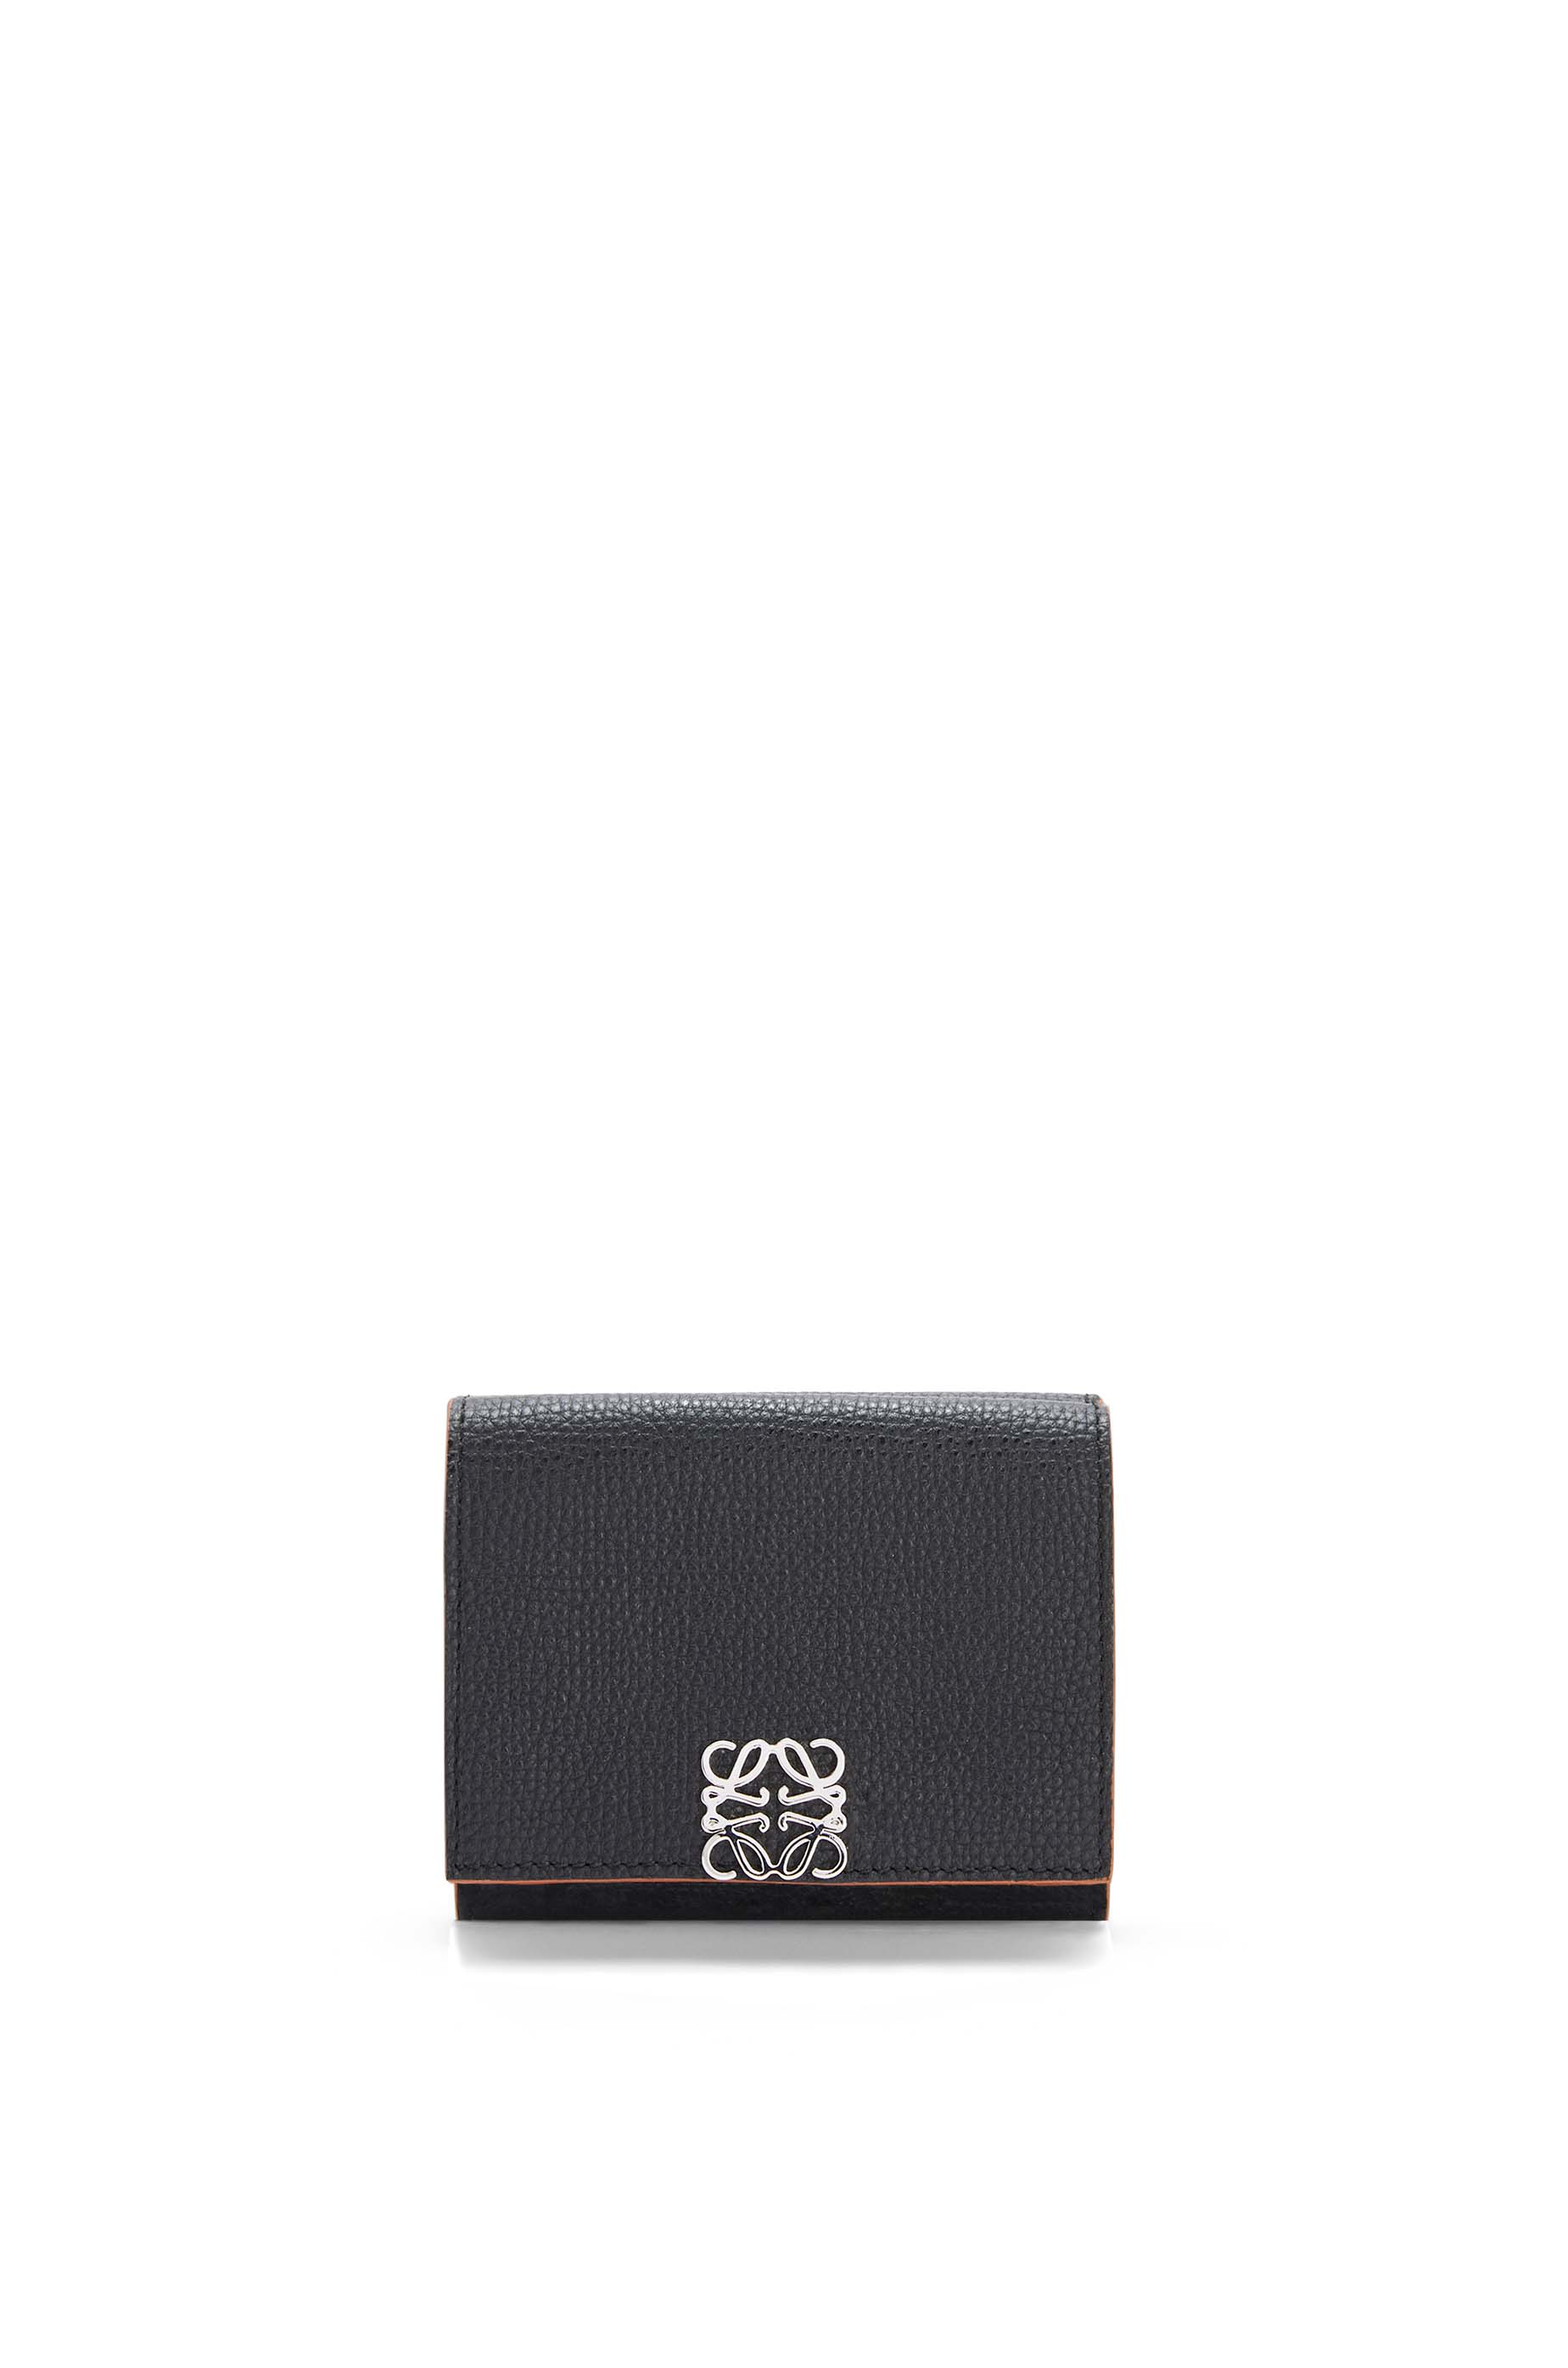 Anagram trifold 6 cc wallet in pebble 